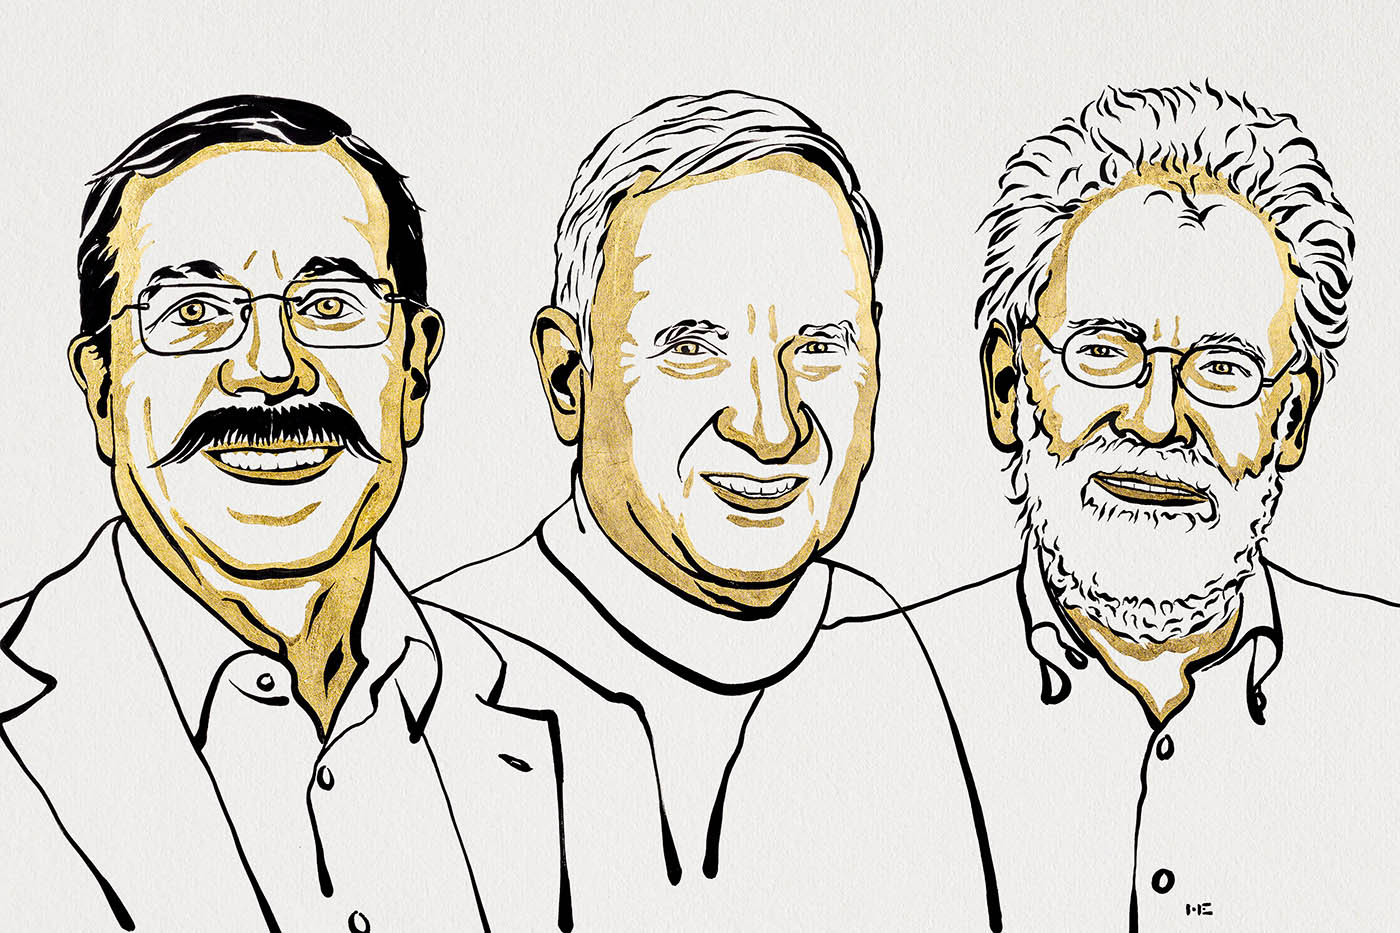 Line-drawing illustration of the Nobel Prize in Physics 2022 laureates, from left to right, Alain Aspect, John F. Clauser and Anton Zeilinger. The illustration shows their head and shoulders using black outlines and yellow shading.